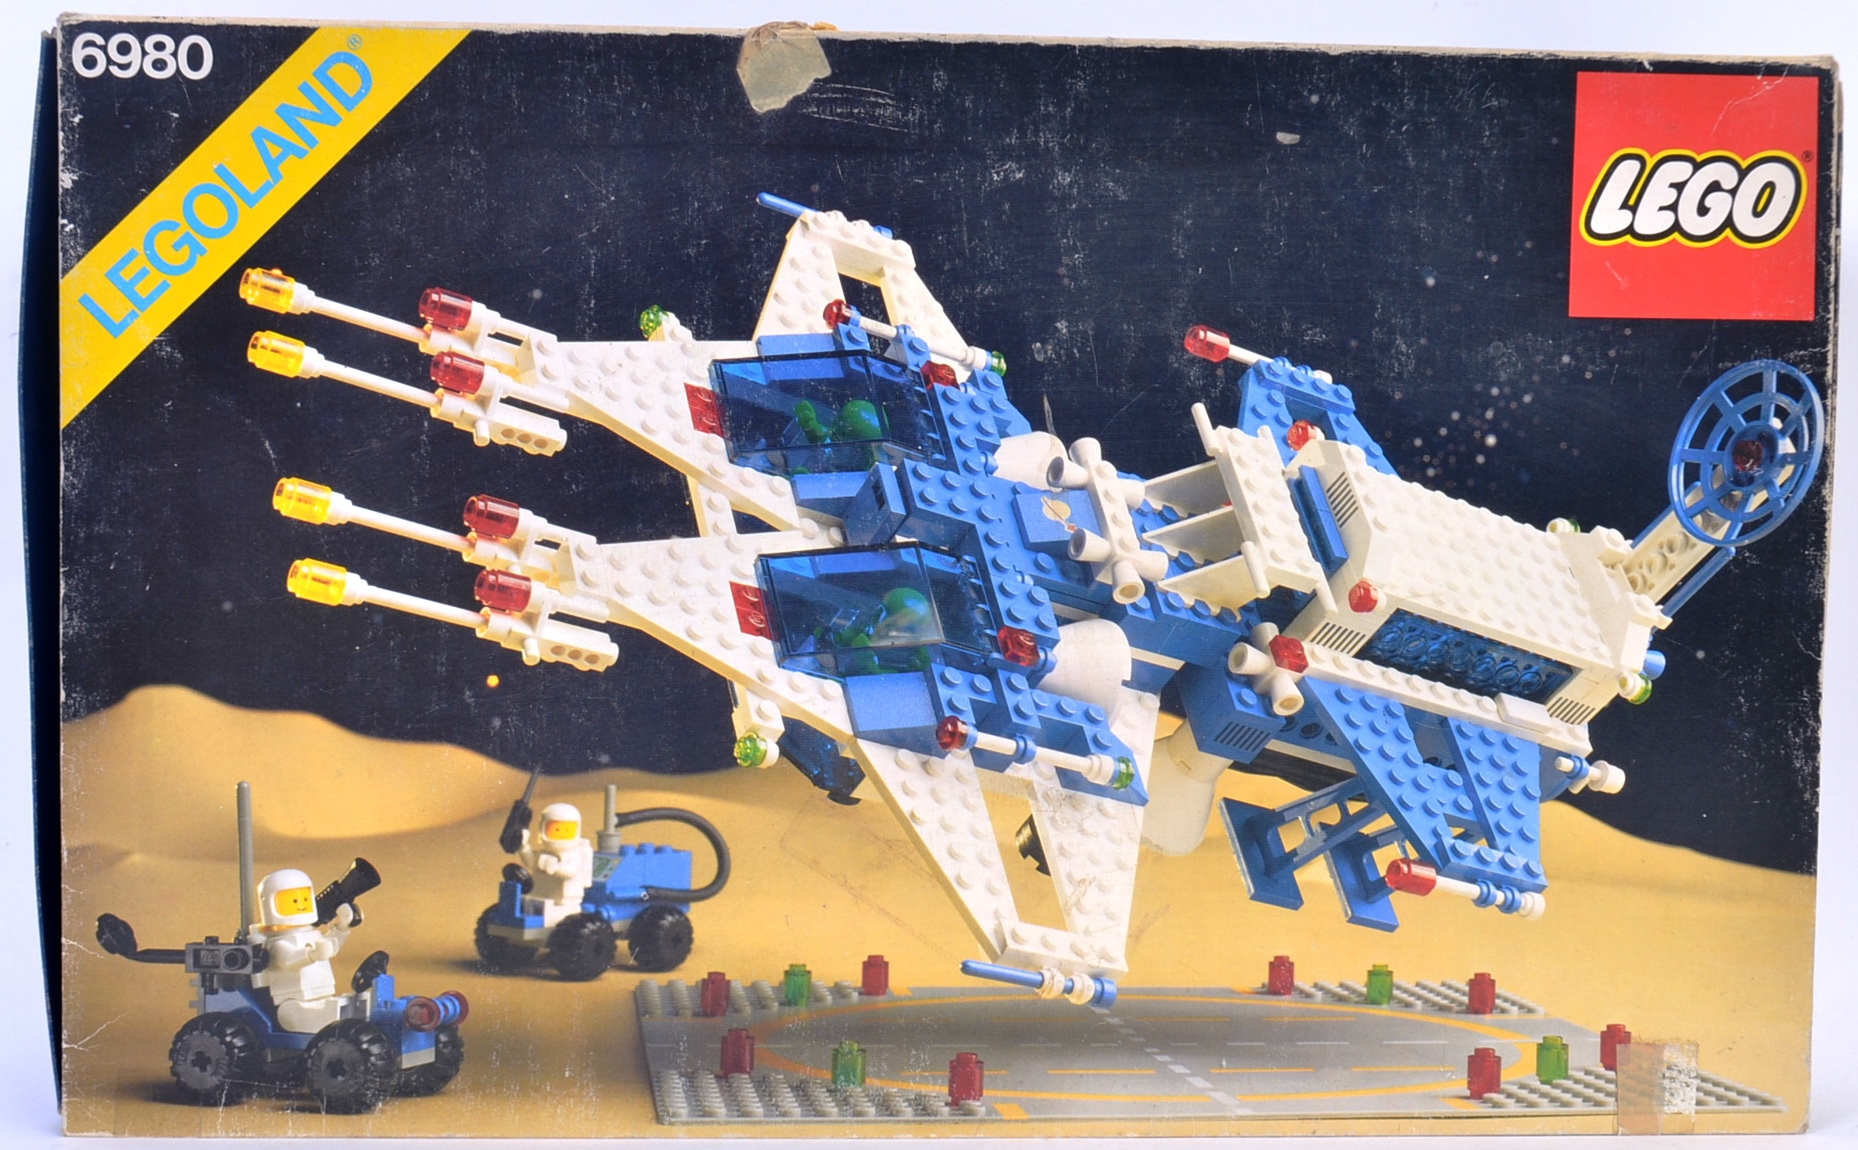 LEGO SPACE; An original 1980's Lego Land SPACE boxed set 6980 ' Space Commander .